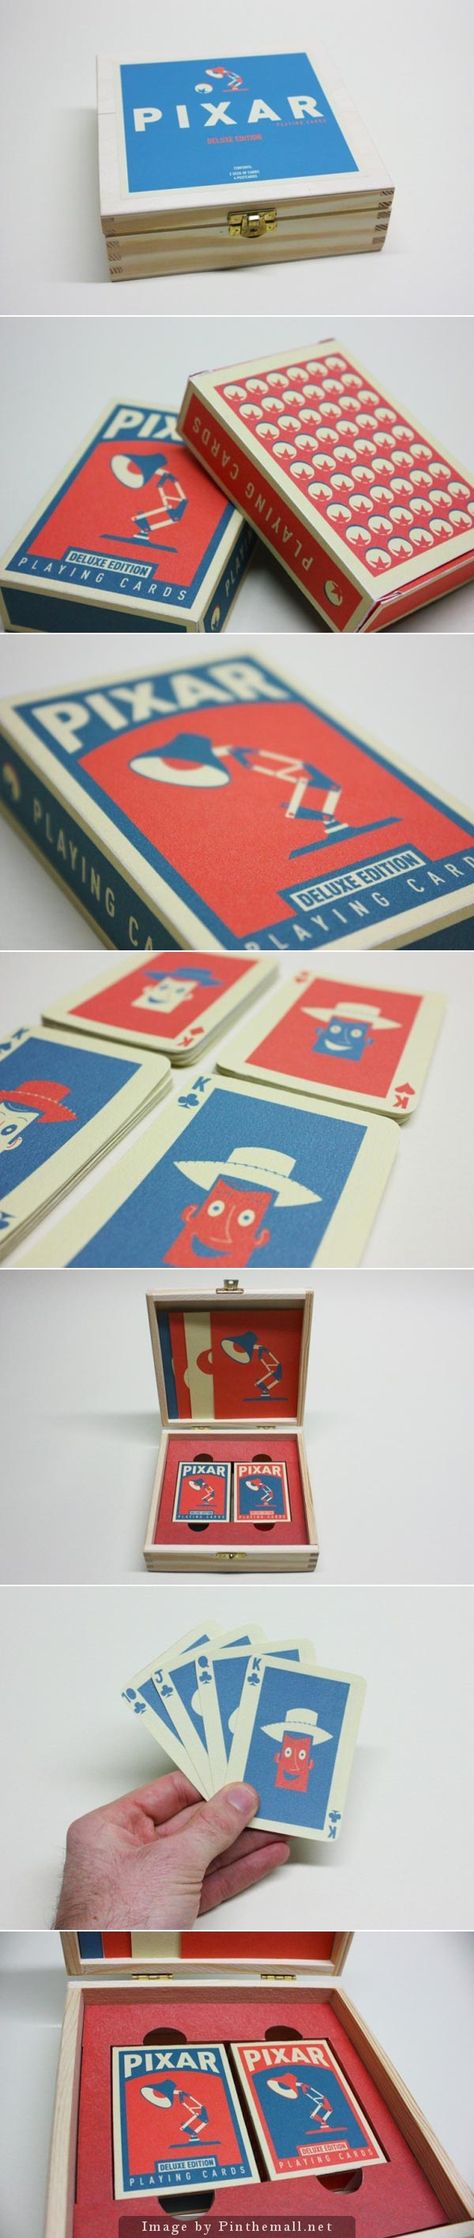 Pixar Playing Cards Box by Chris Anderson Card Games, Vintage, Playing Card Box, Collectible Cards, Playing Card, Playing Cards, Playing Cards Design, Box, Card Box